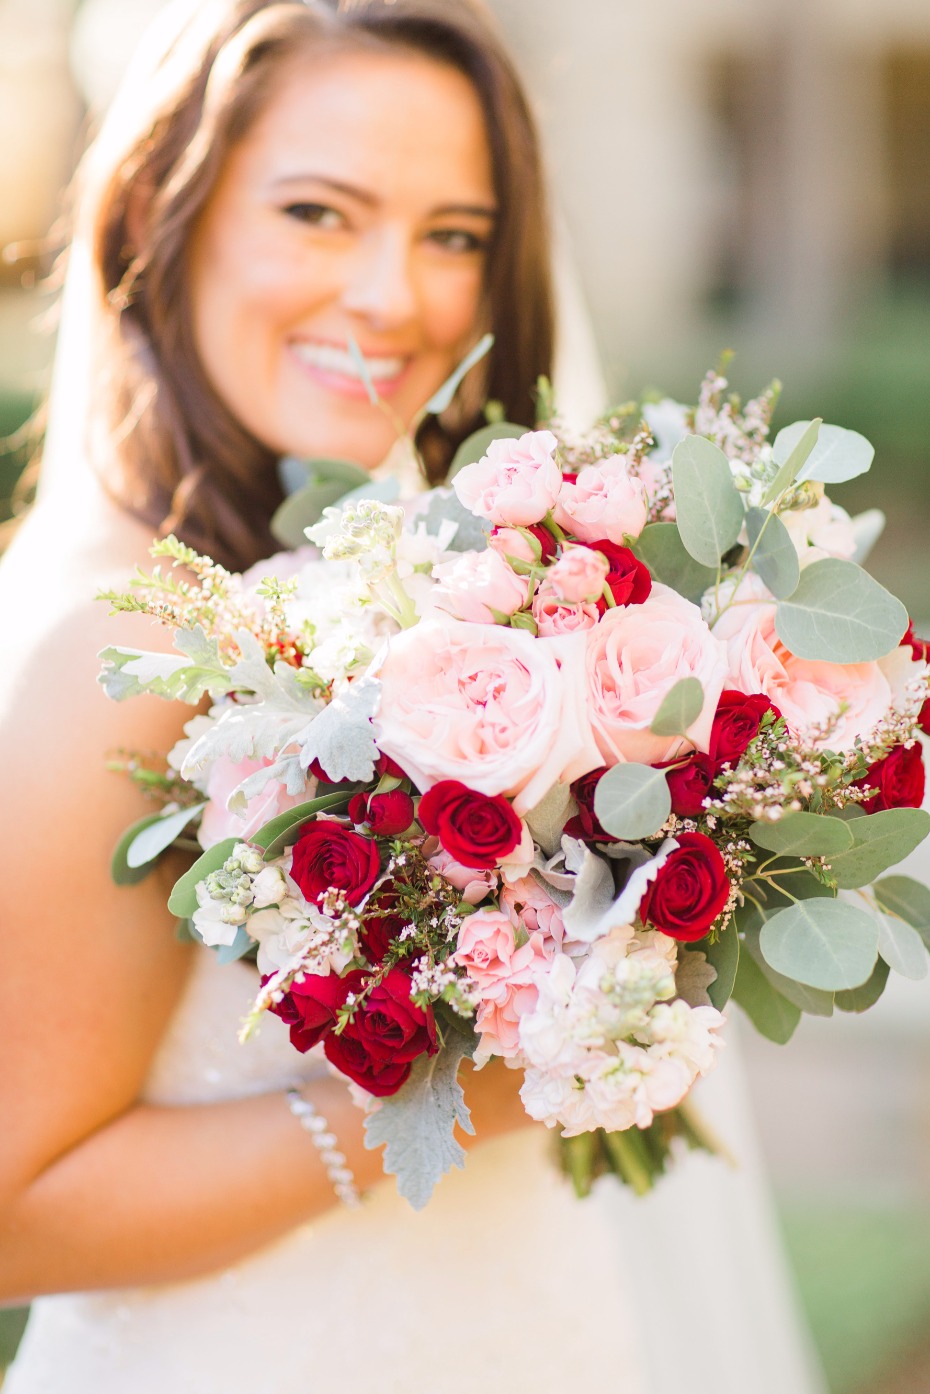 pink and red wedding bouquet